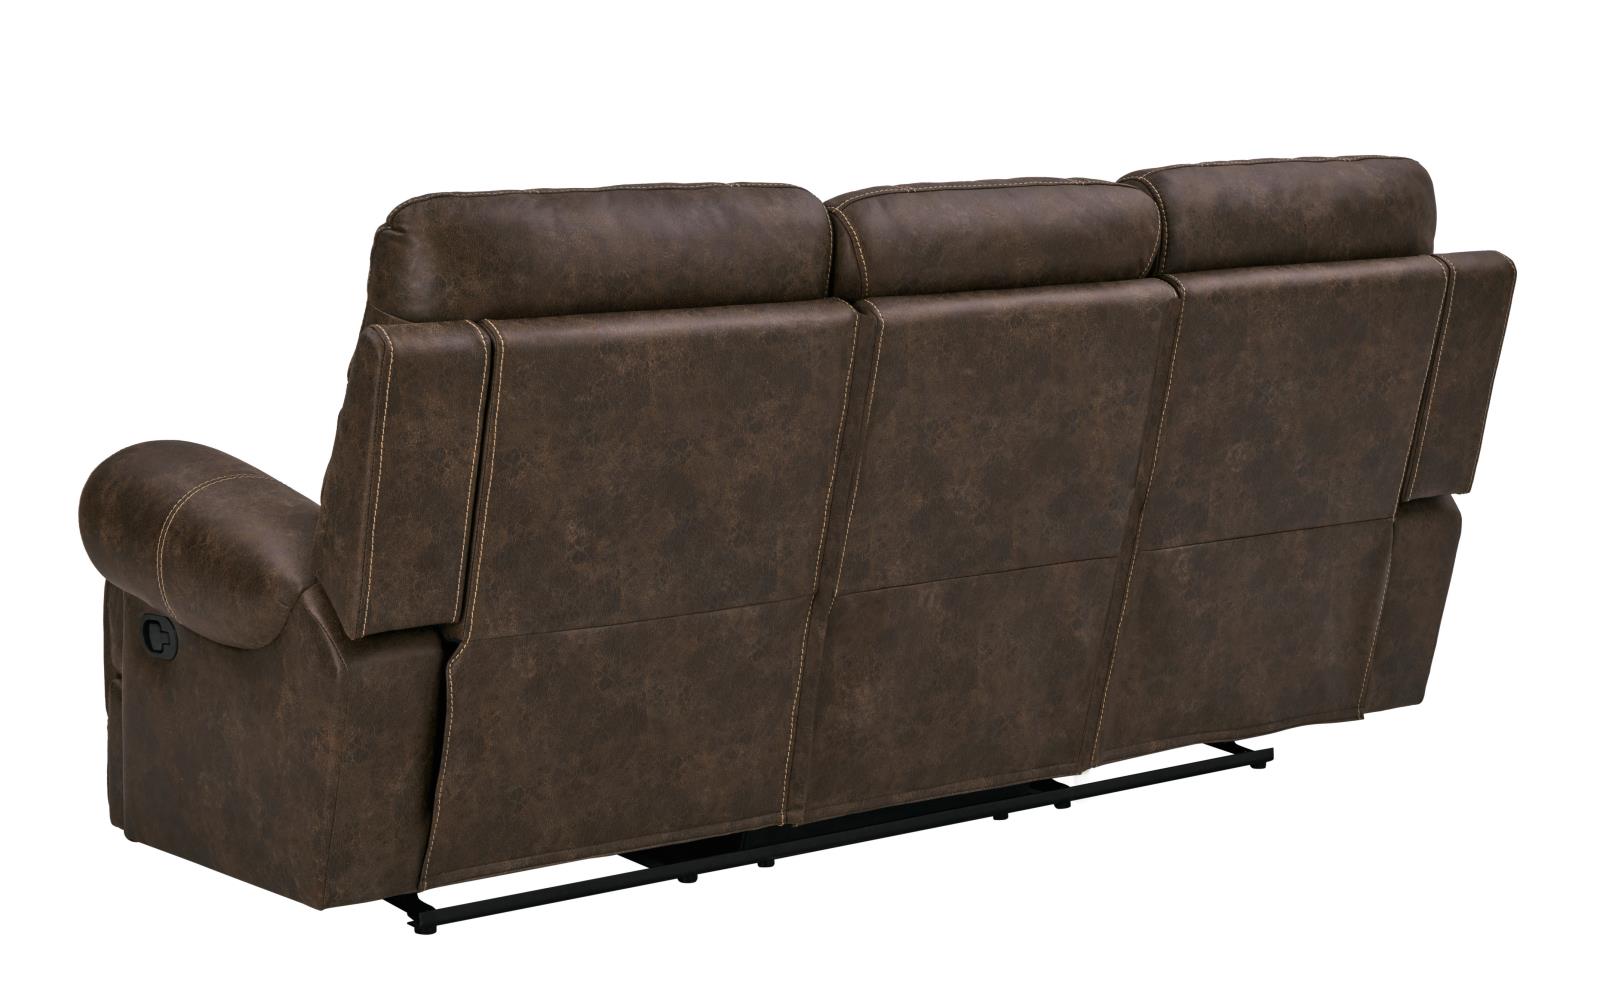 Brixton Upholstered Motion Sofa with Cup Holders Buckskin Brown - What A Room